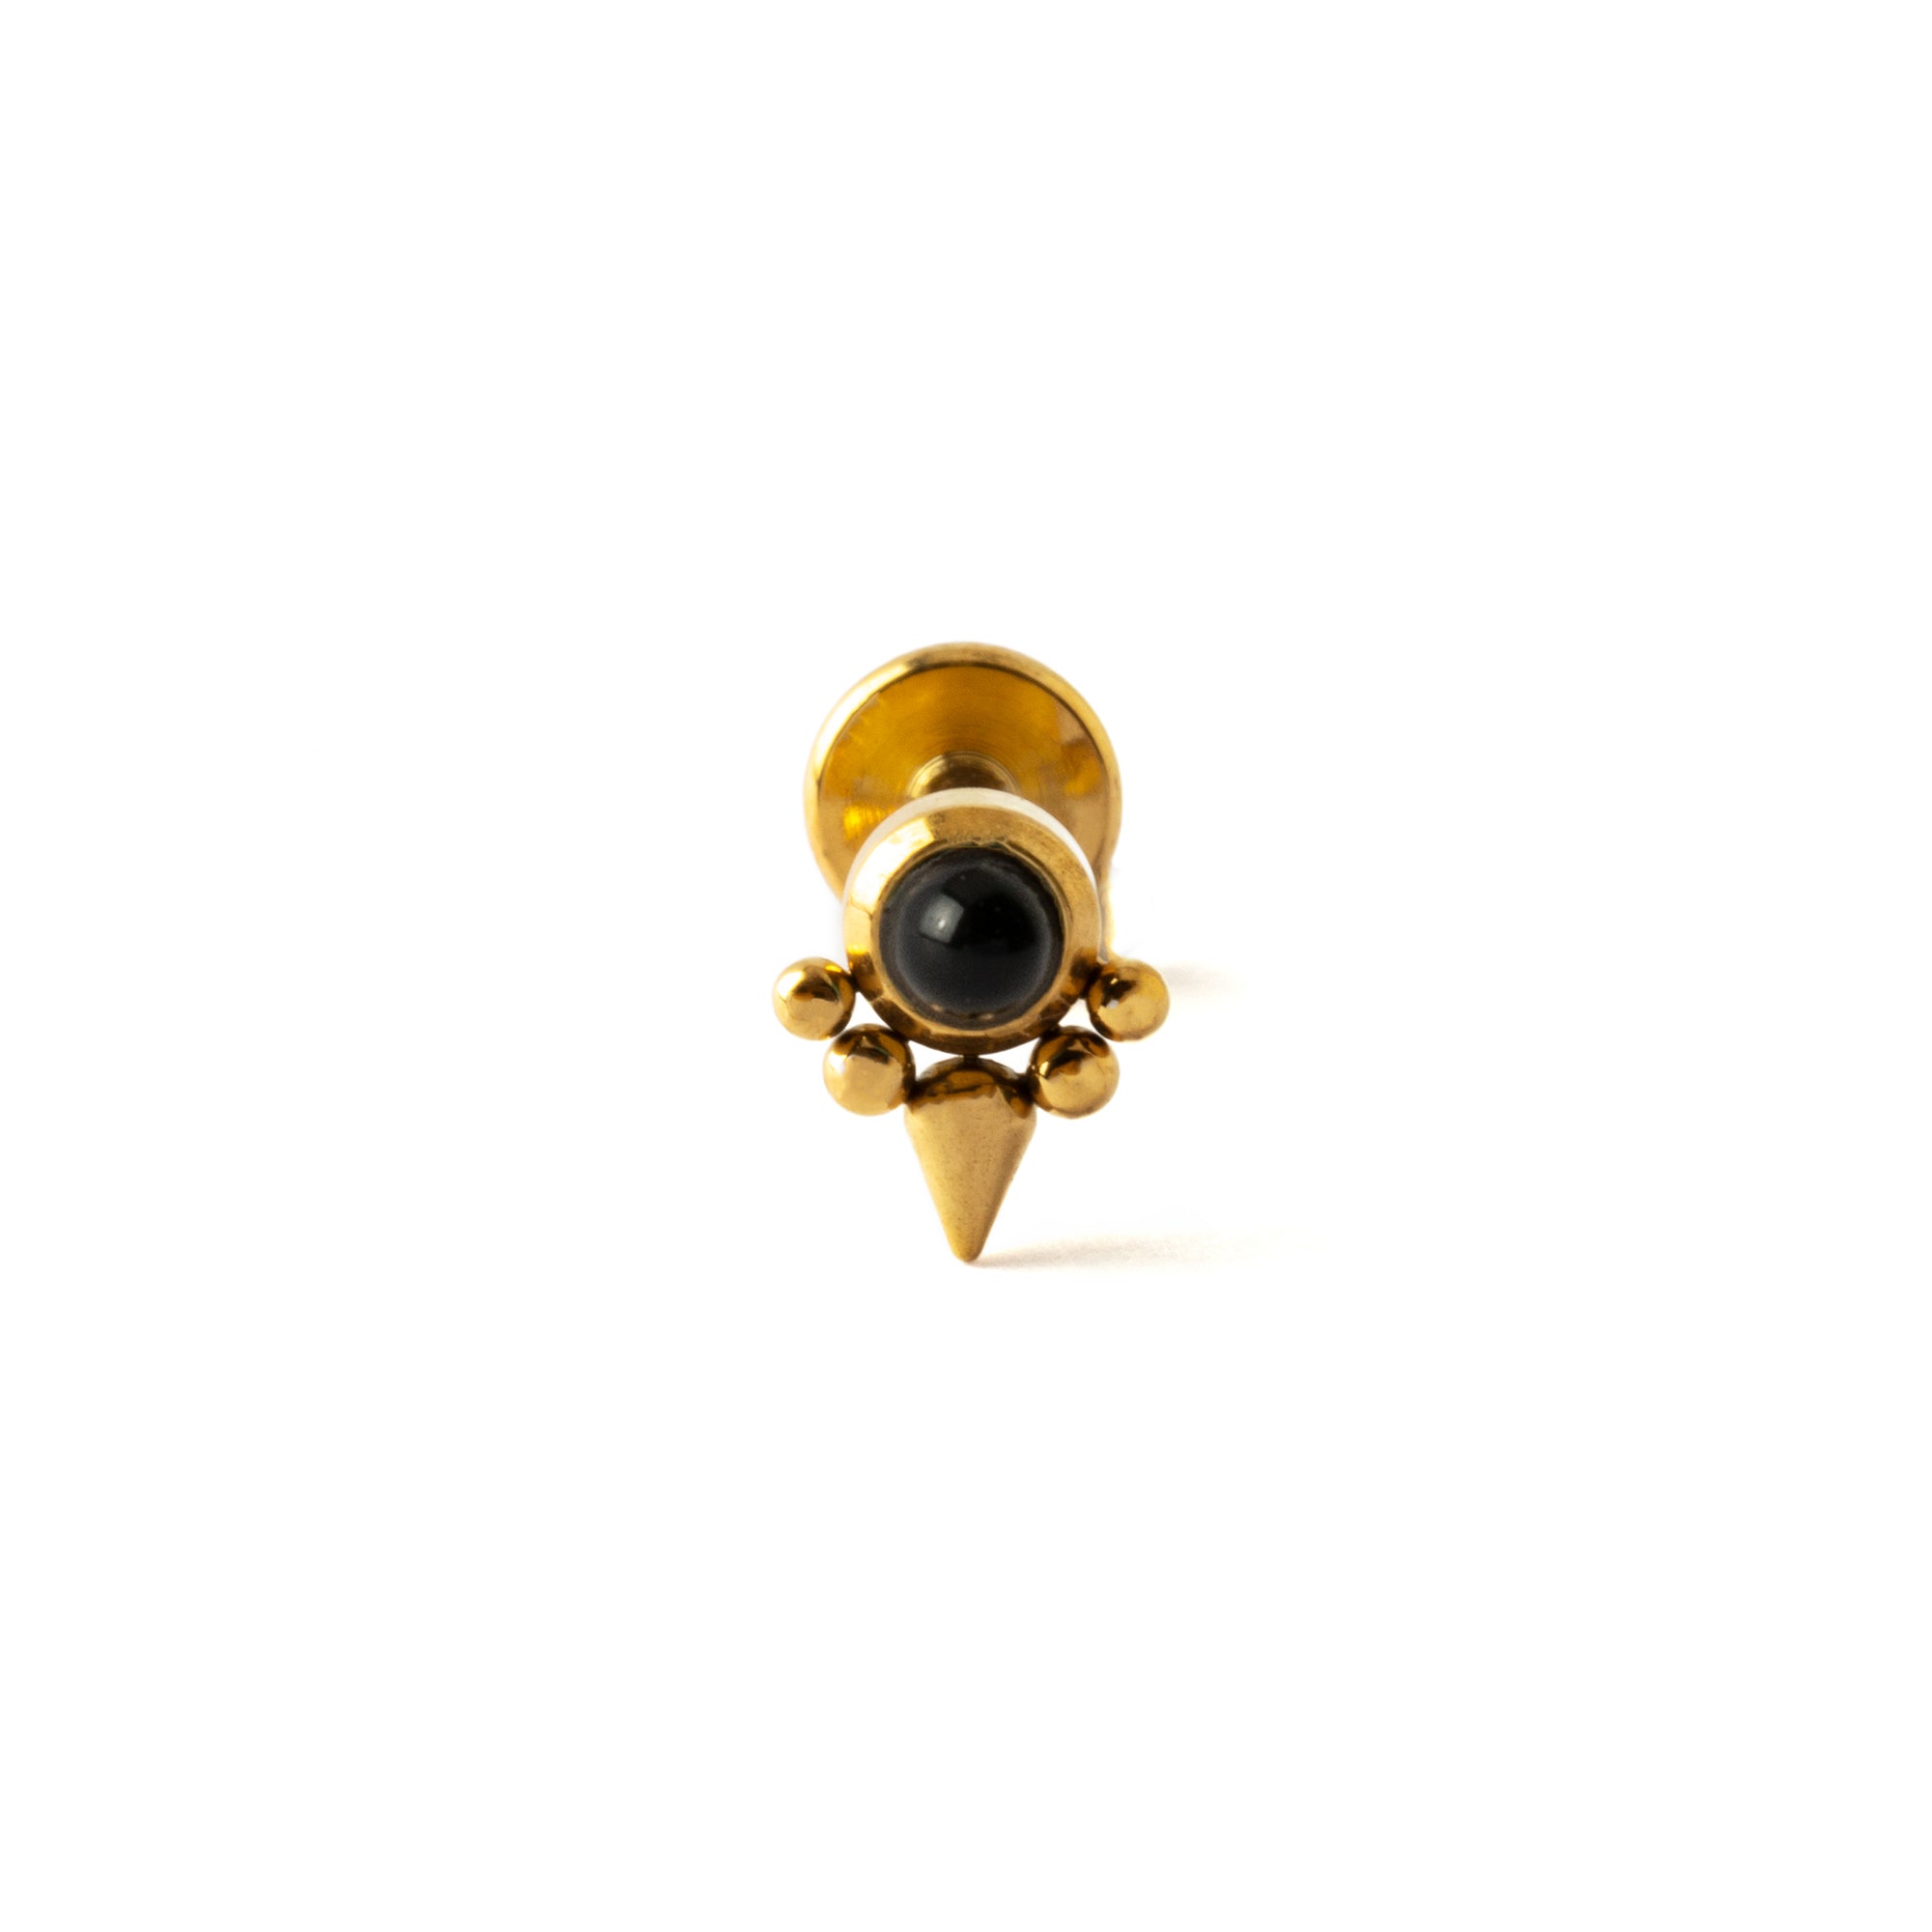 Elvira Gold surgical steel internally threaded Labret with Black Onyx frontal view